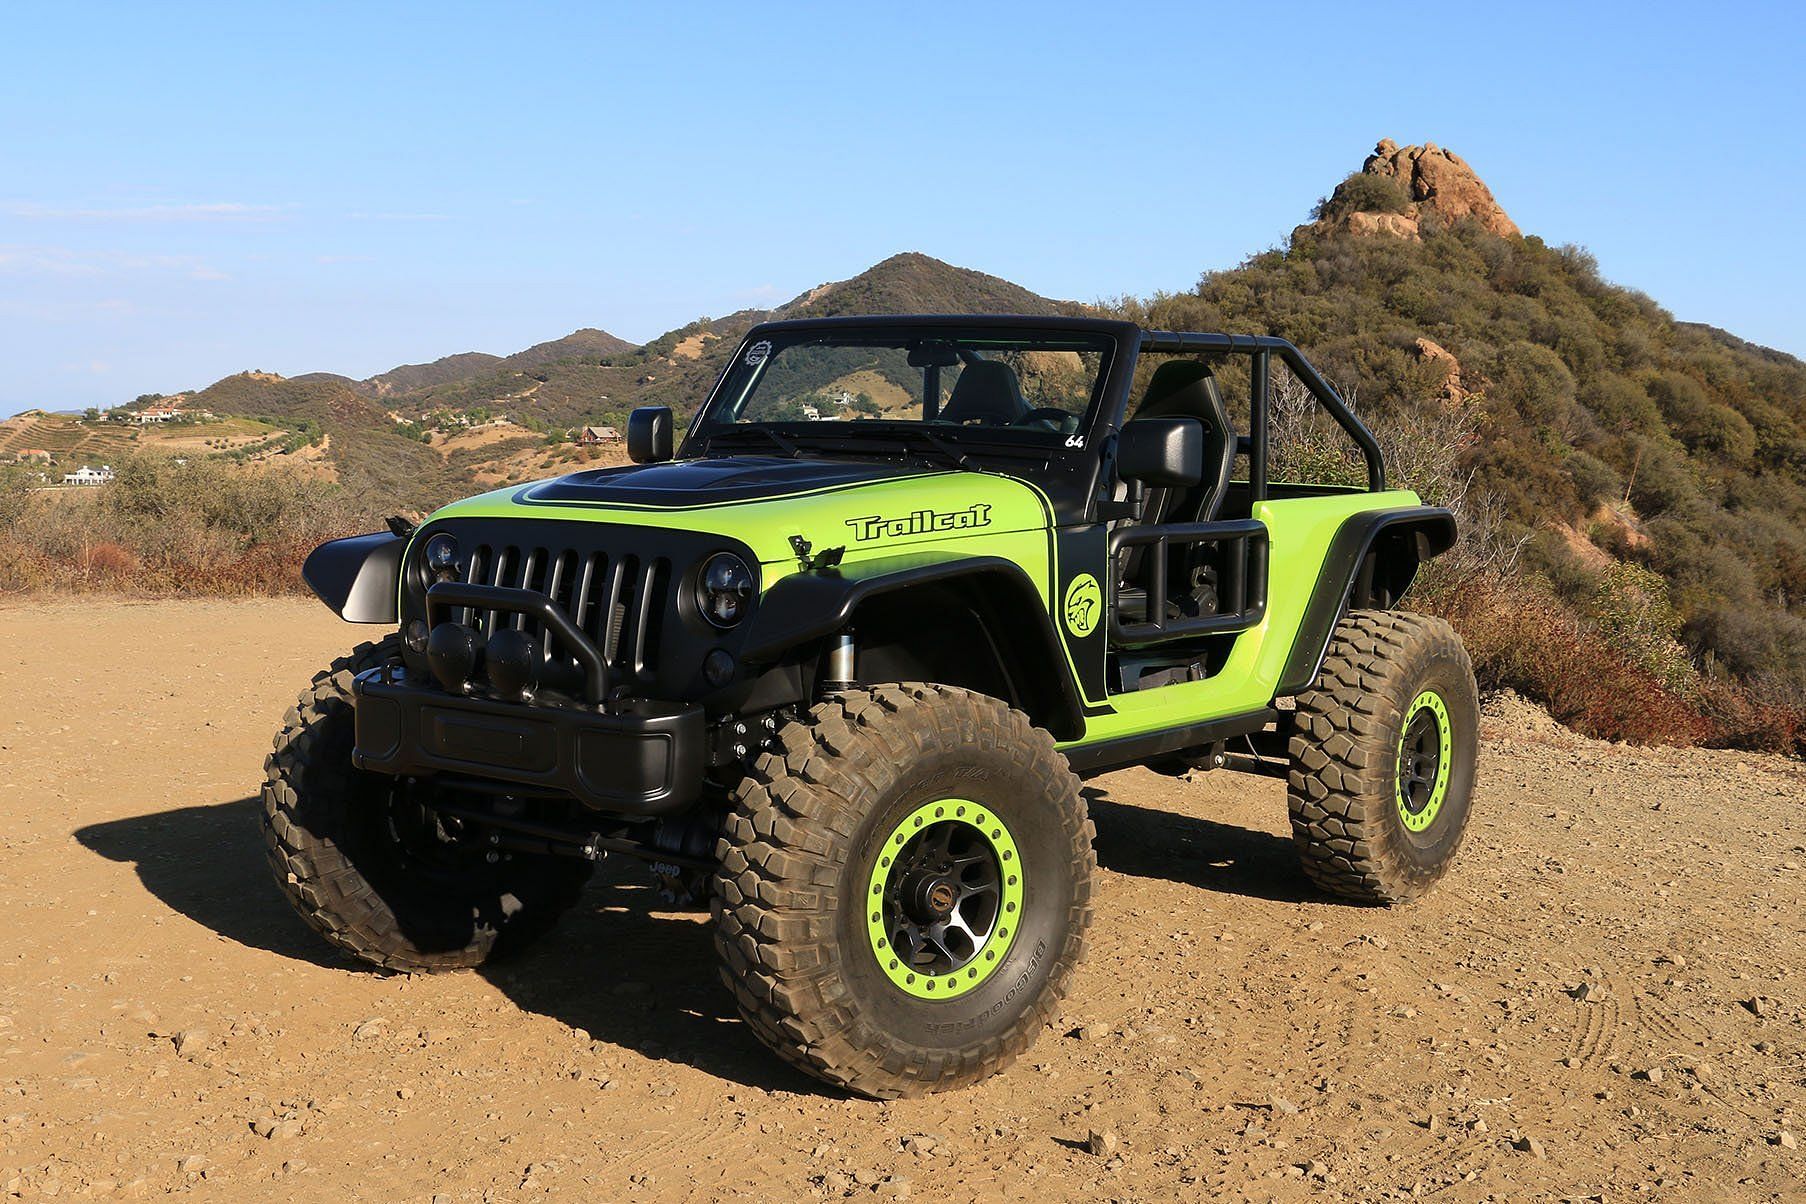 It is equipped with a 6.2-liter HEMI V8 engine (Image via Off-Road Xtreme)